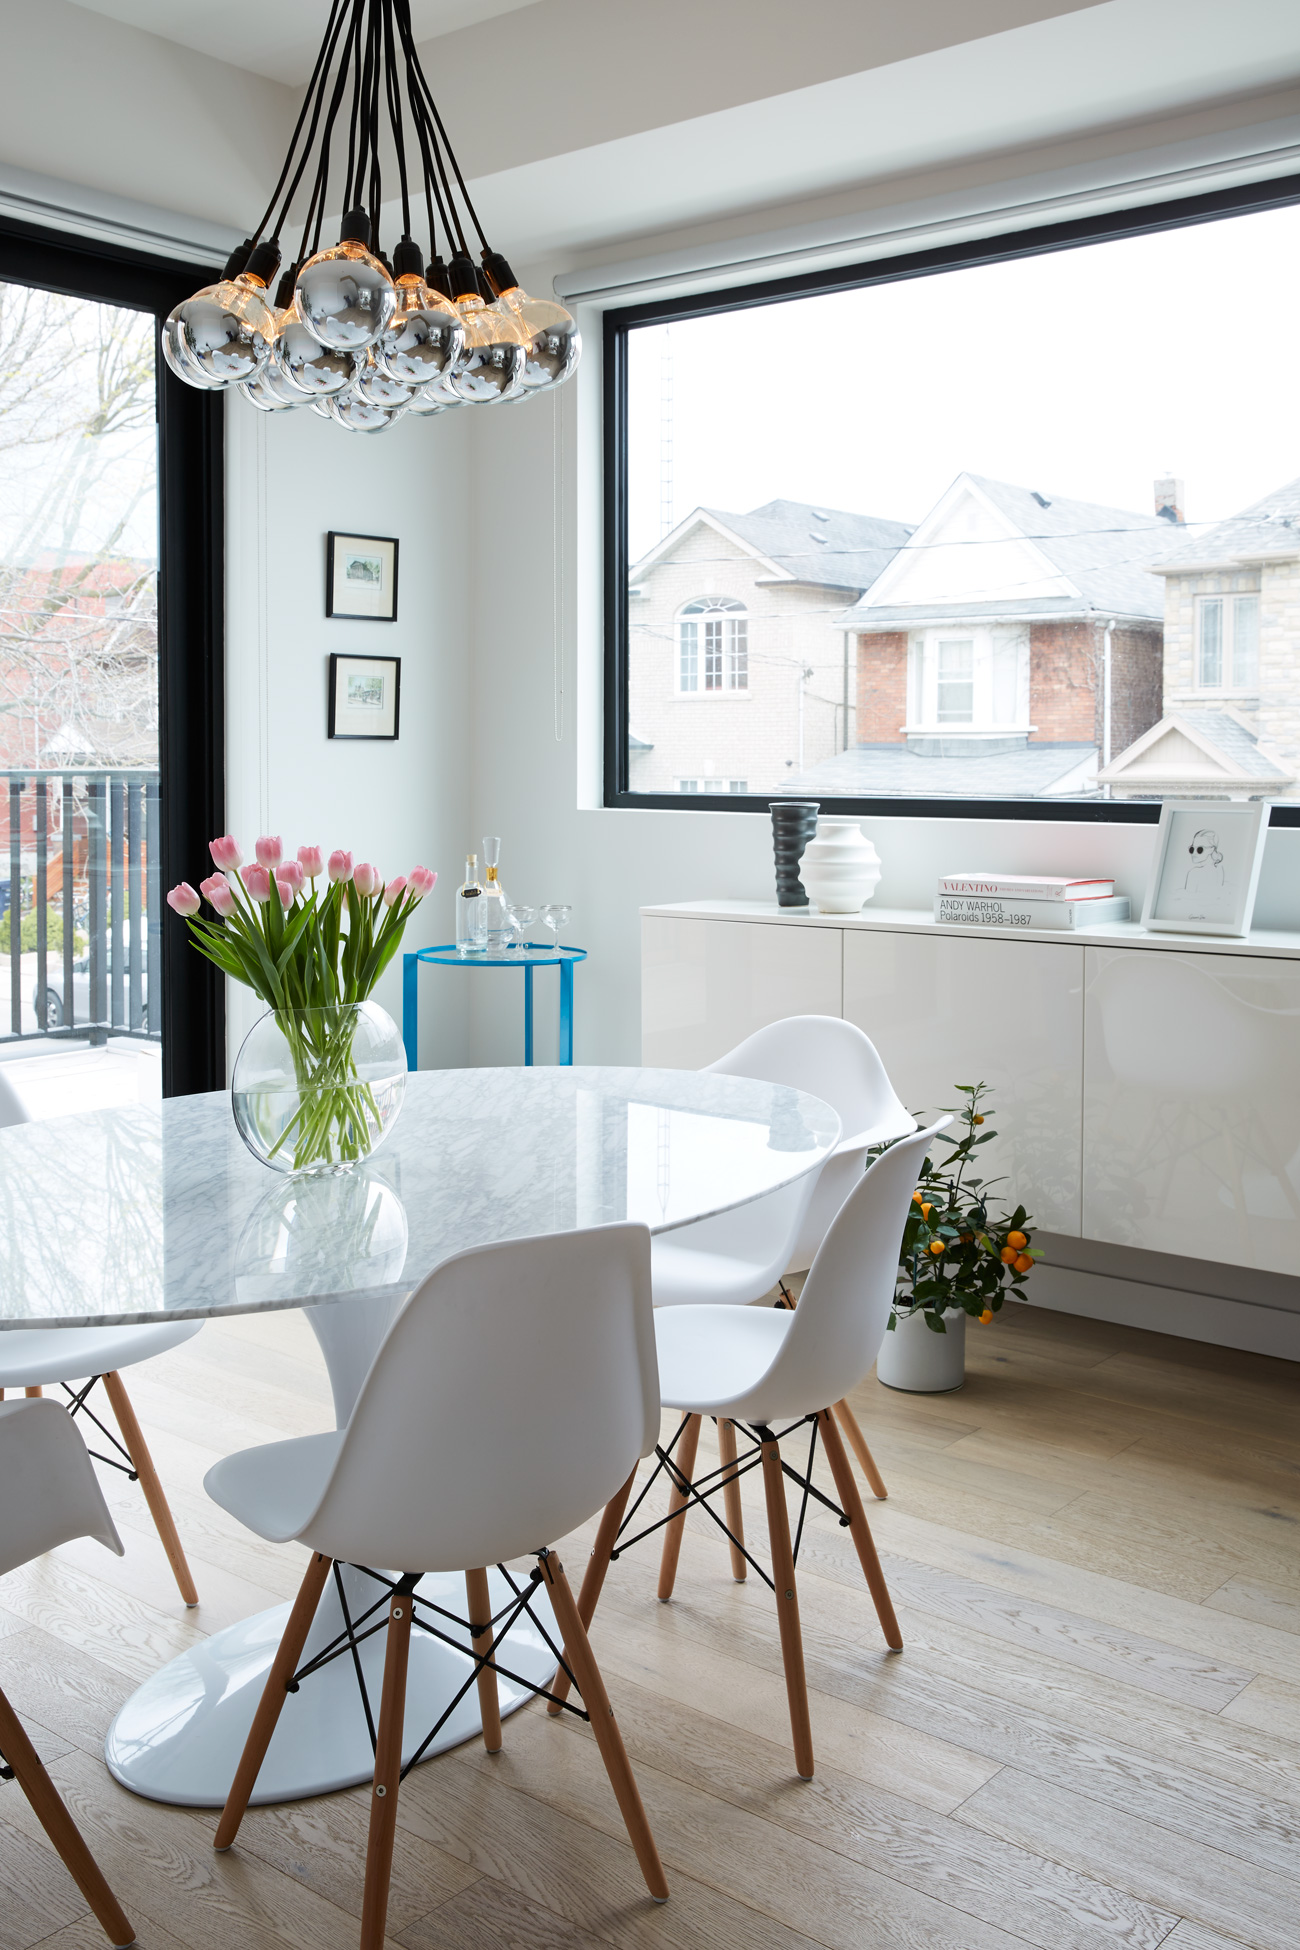 Furniture in the dining room – with north-facing balcony – is from Rove Concepts (Vancouver). Photo by Naomi Finlay.